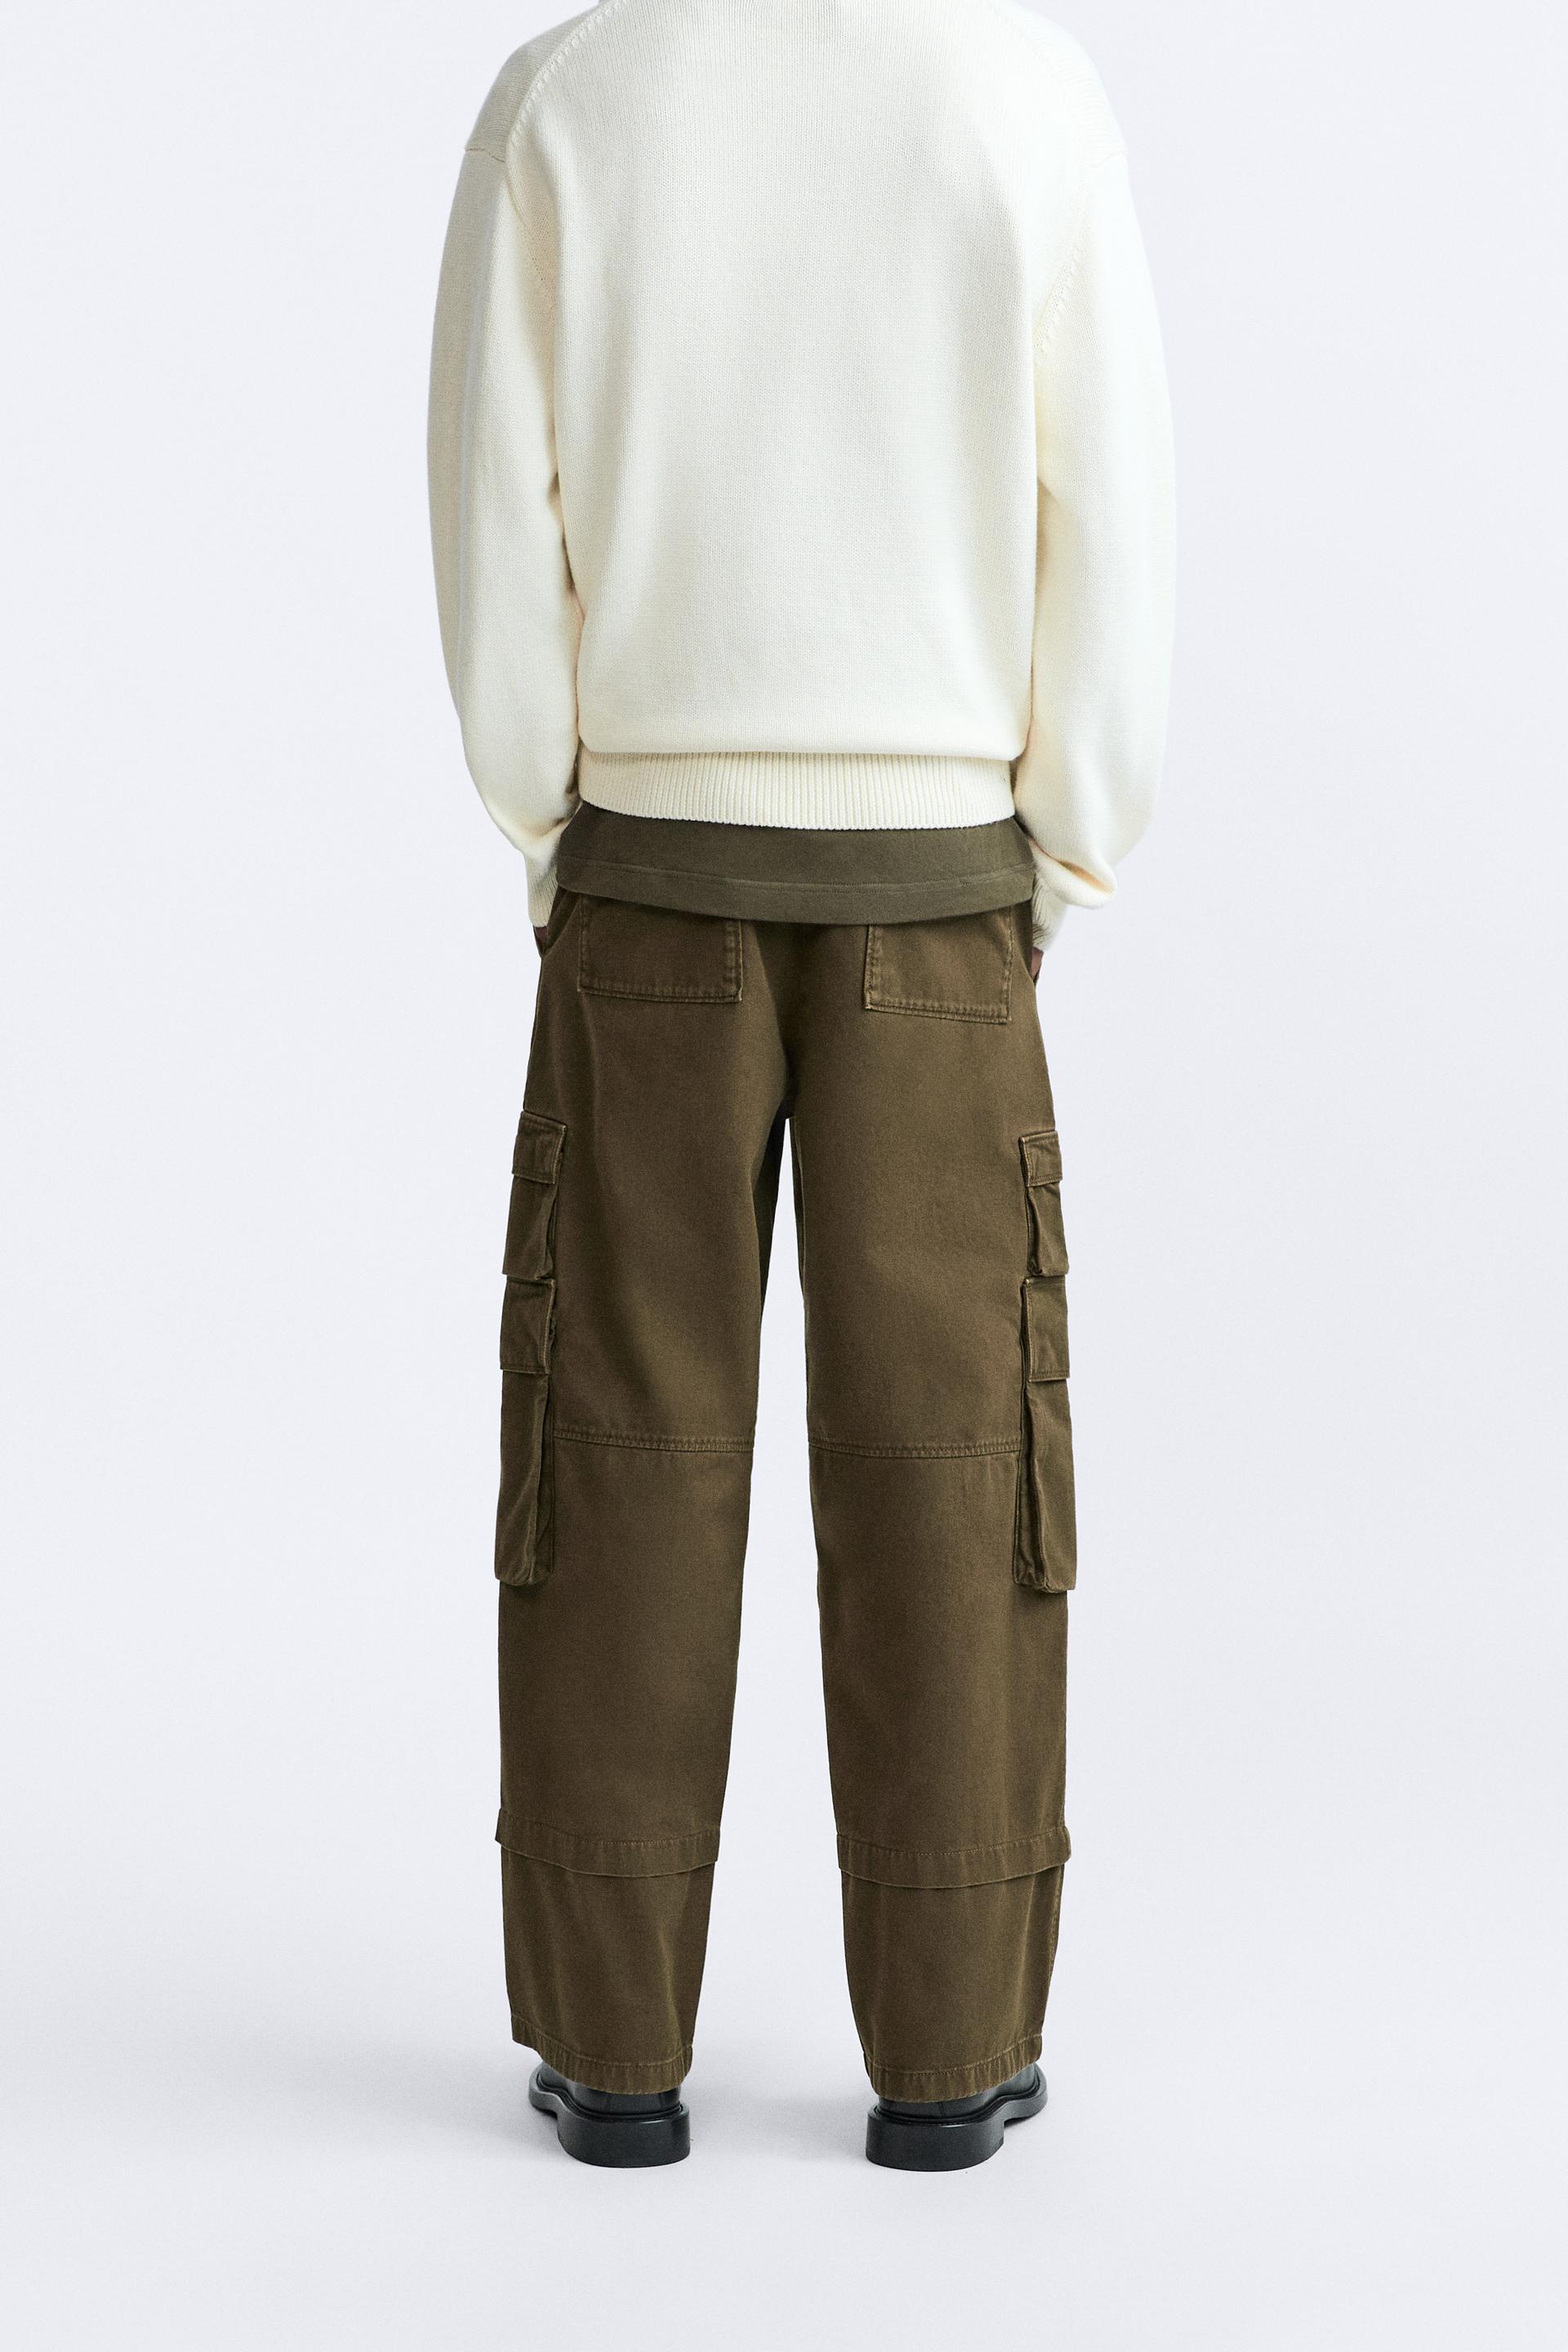 ZARA NEW MAN CARGO TROUSERS WITH UTILITY POCKETS PANT LIGHT TAN 5575/375 